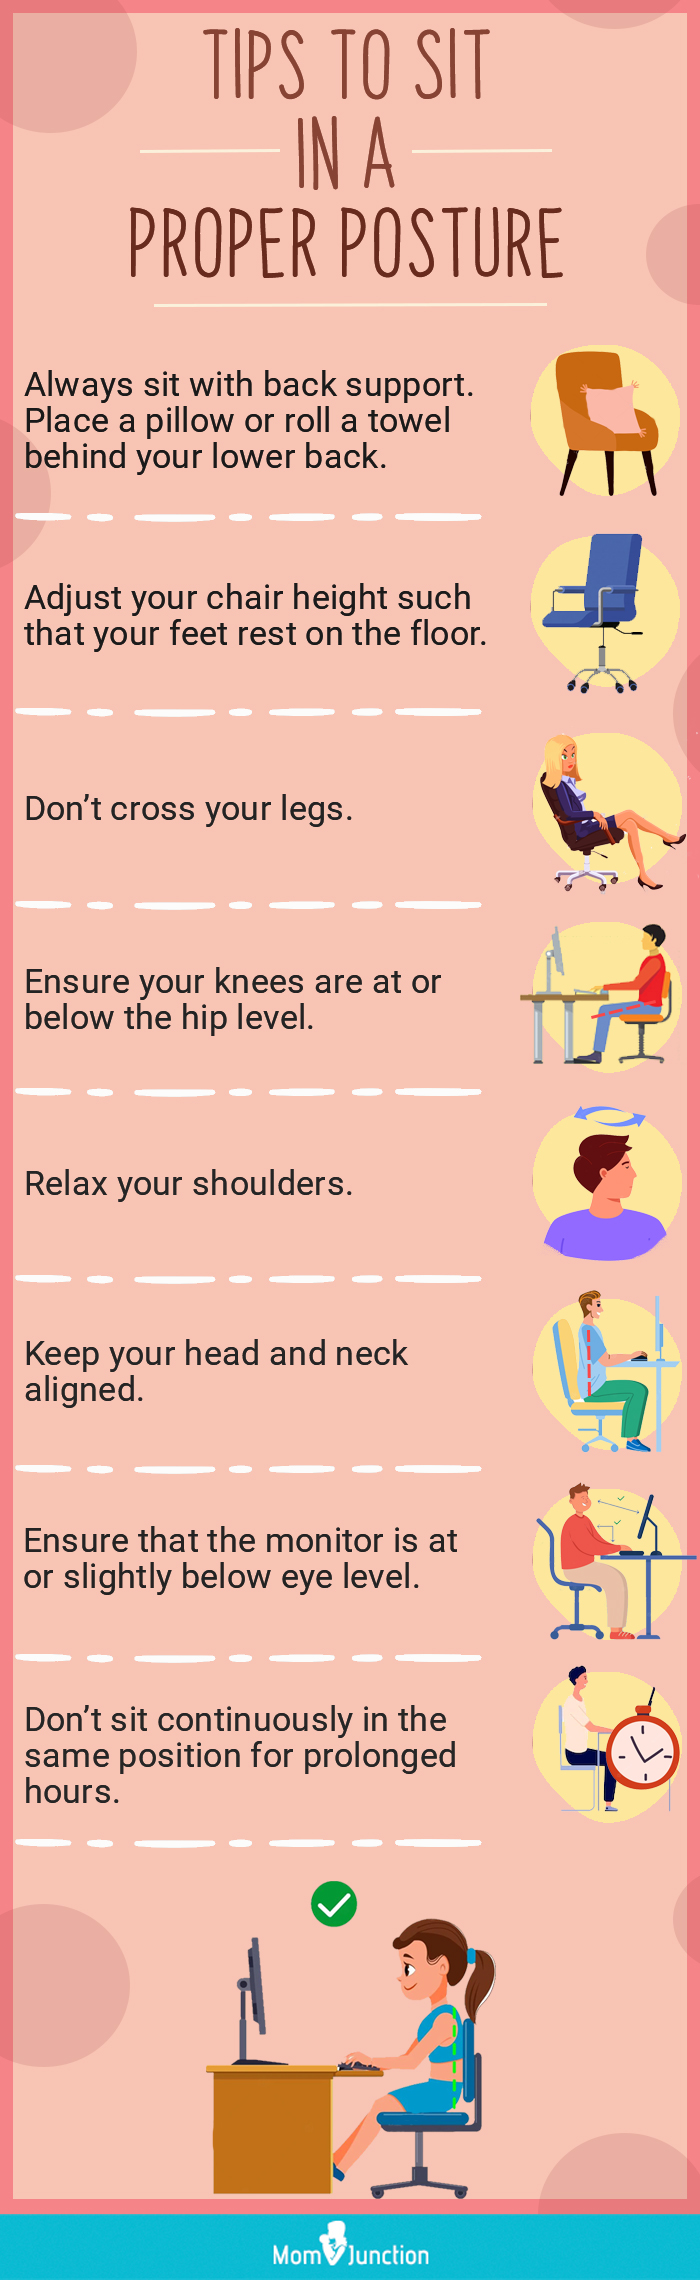 Tips To Sit In A Proper Posture (Infographic)